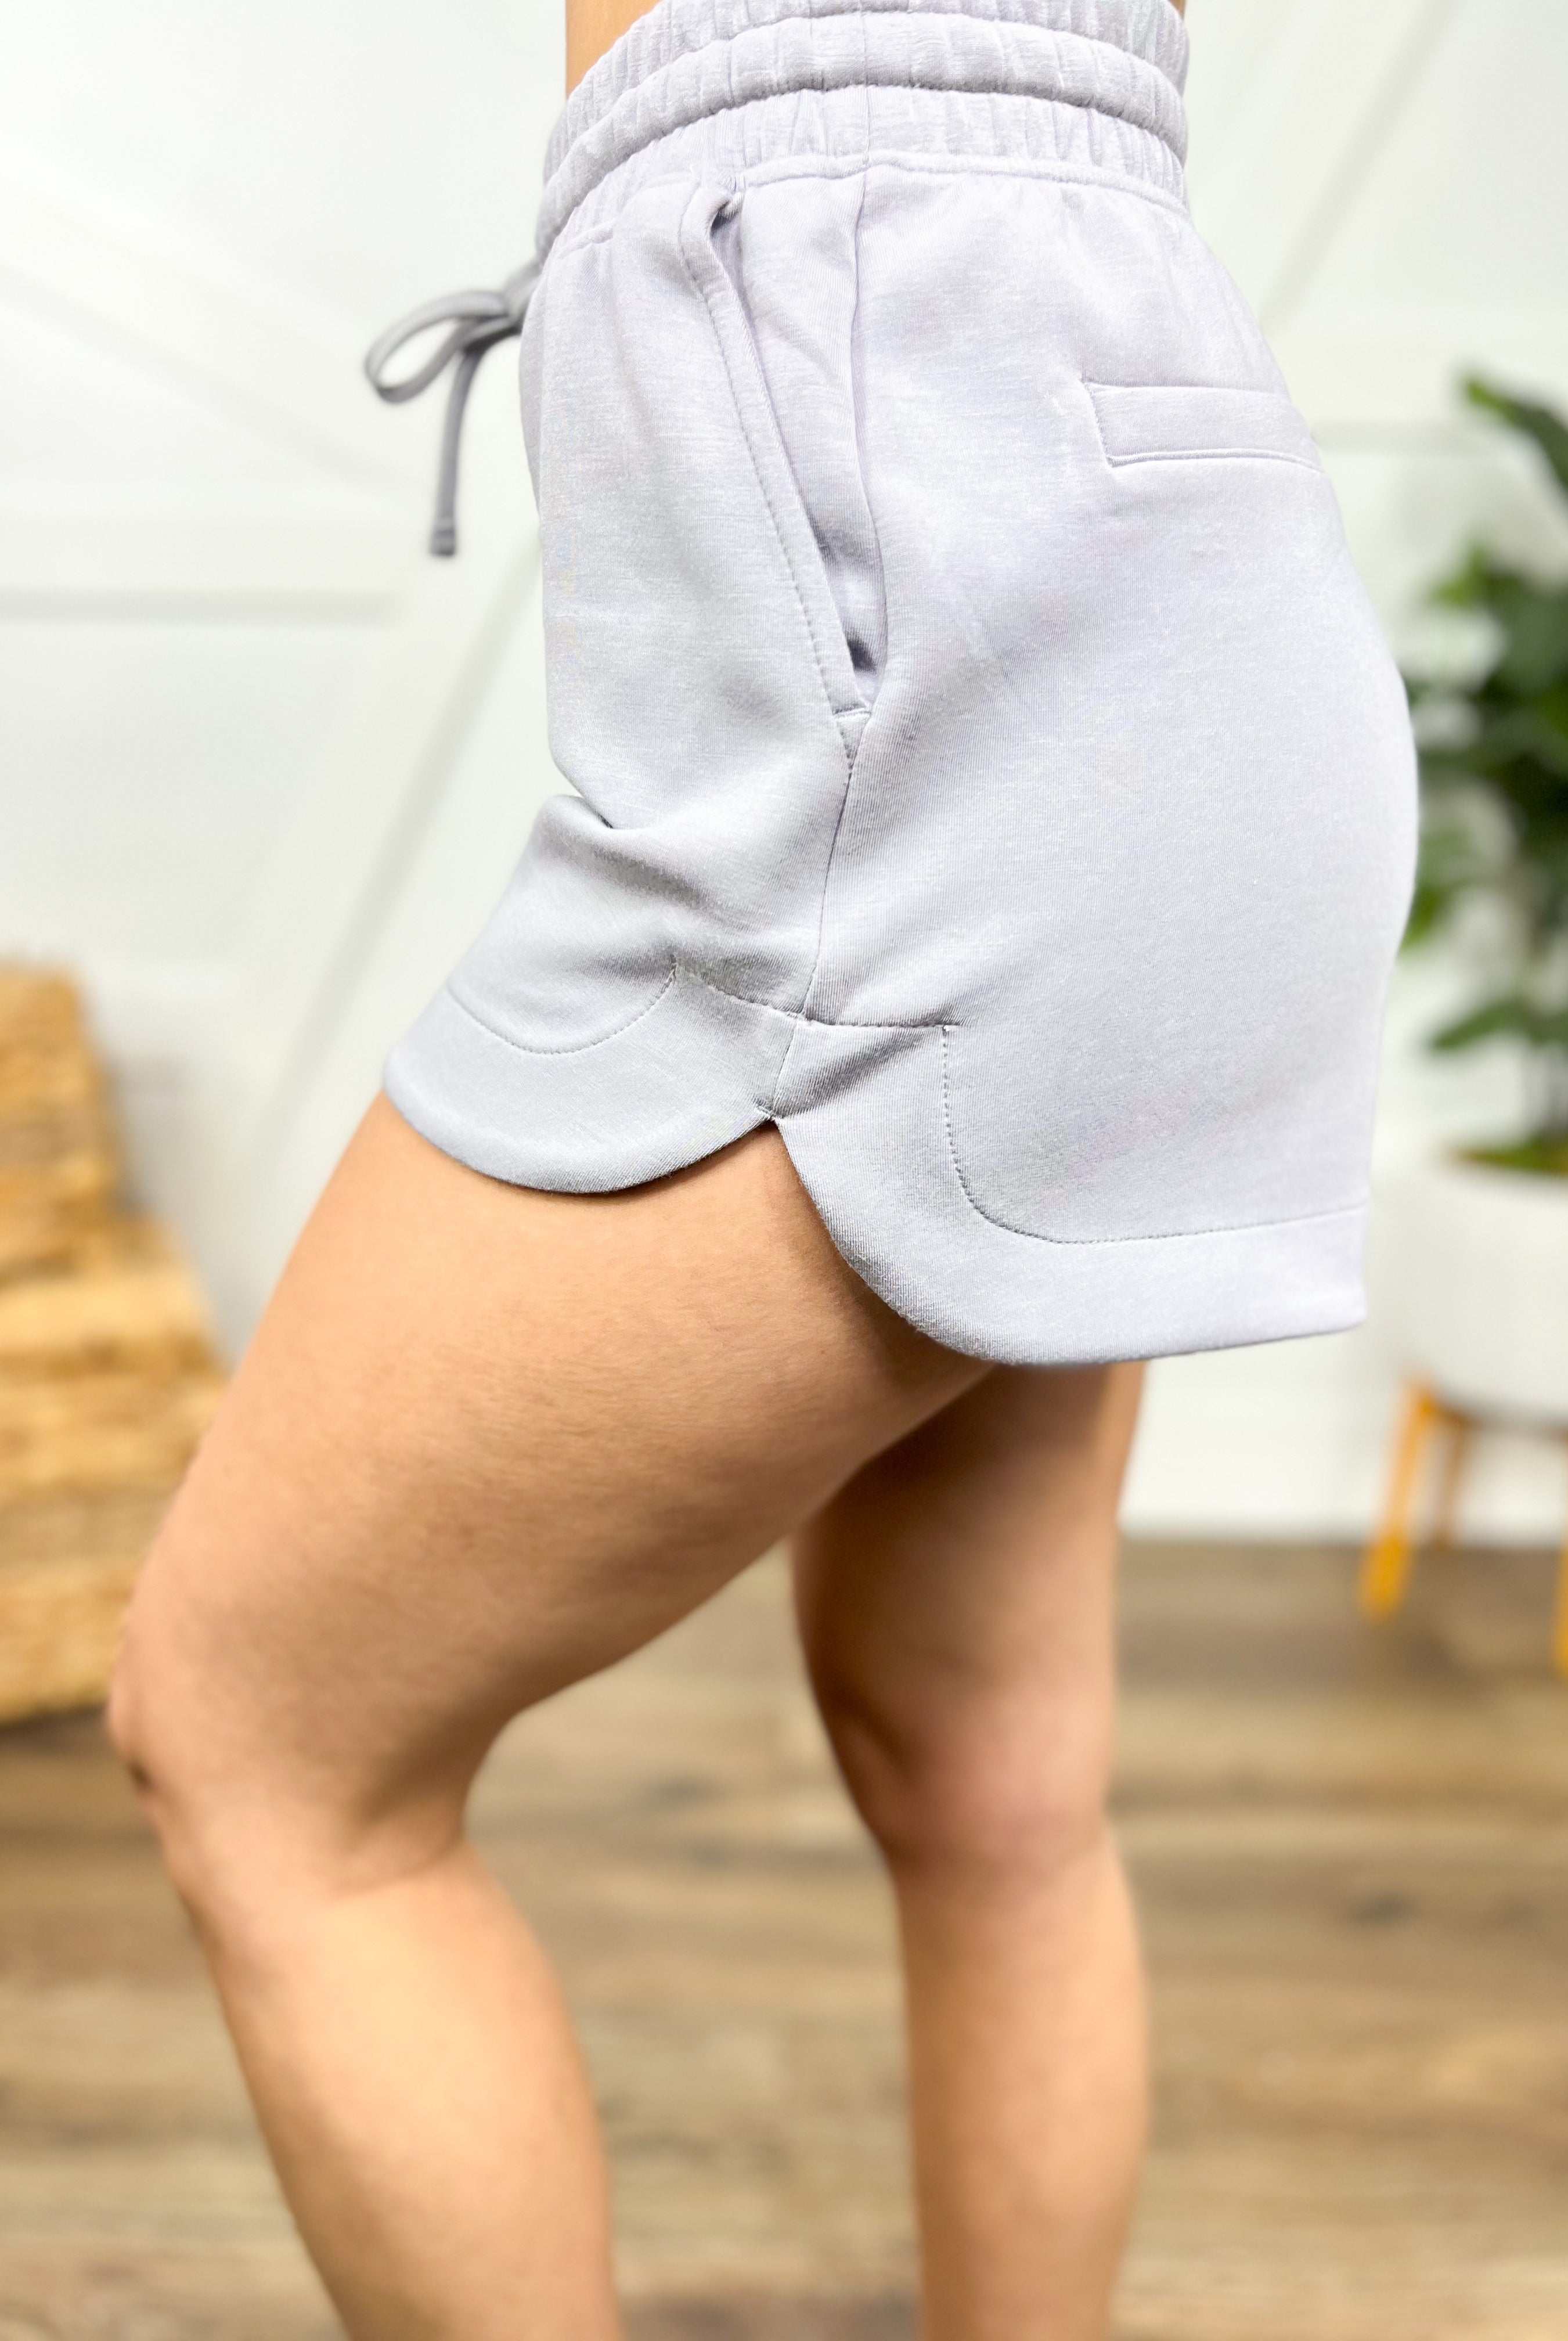 RESTOCK : Perfect Pair Shorts-160 shorts-Rae Mode-Heathered Boho Boutique, Women's Fashion and Accessories in Palmetto, FL